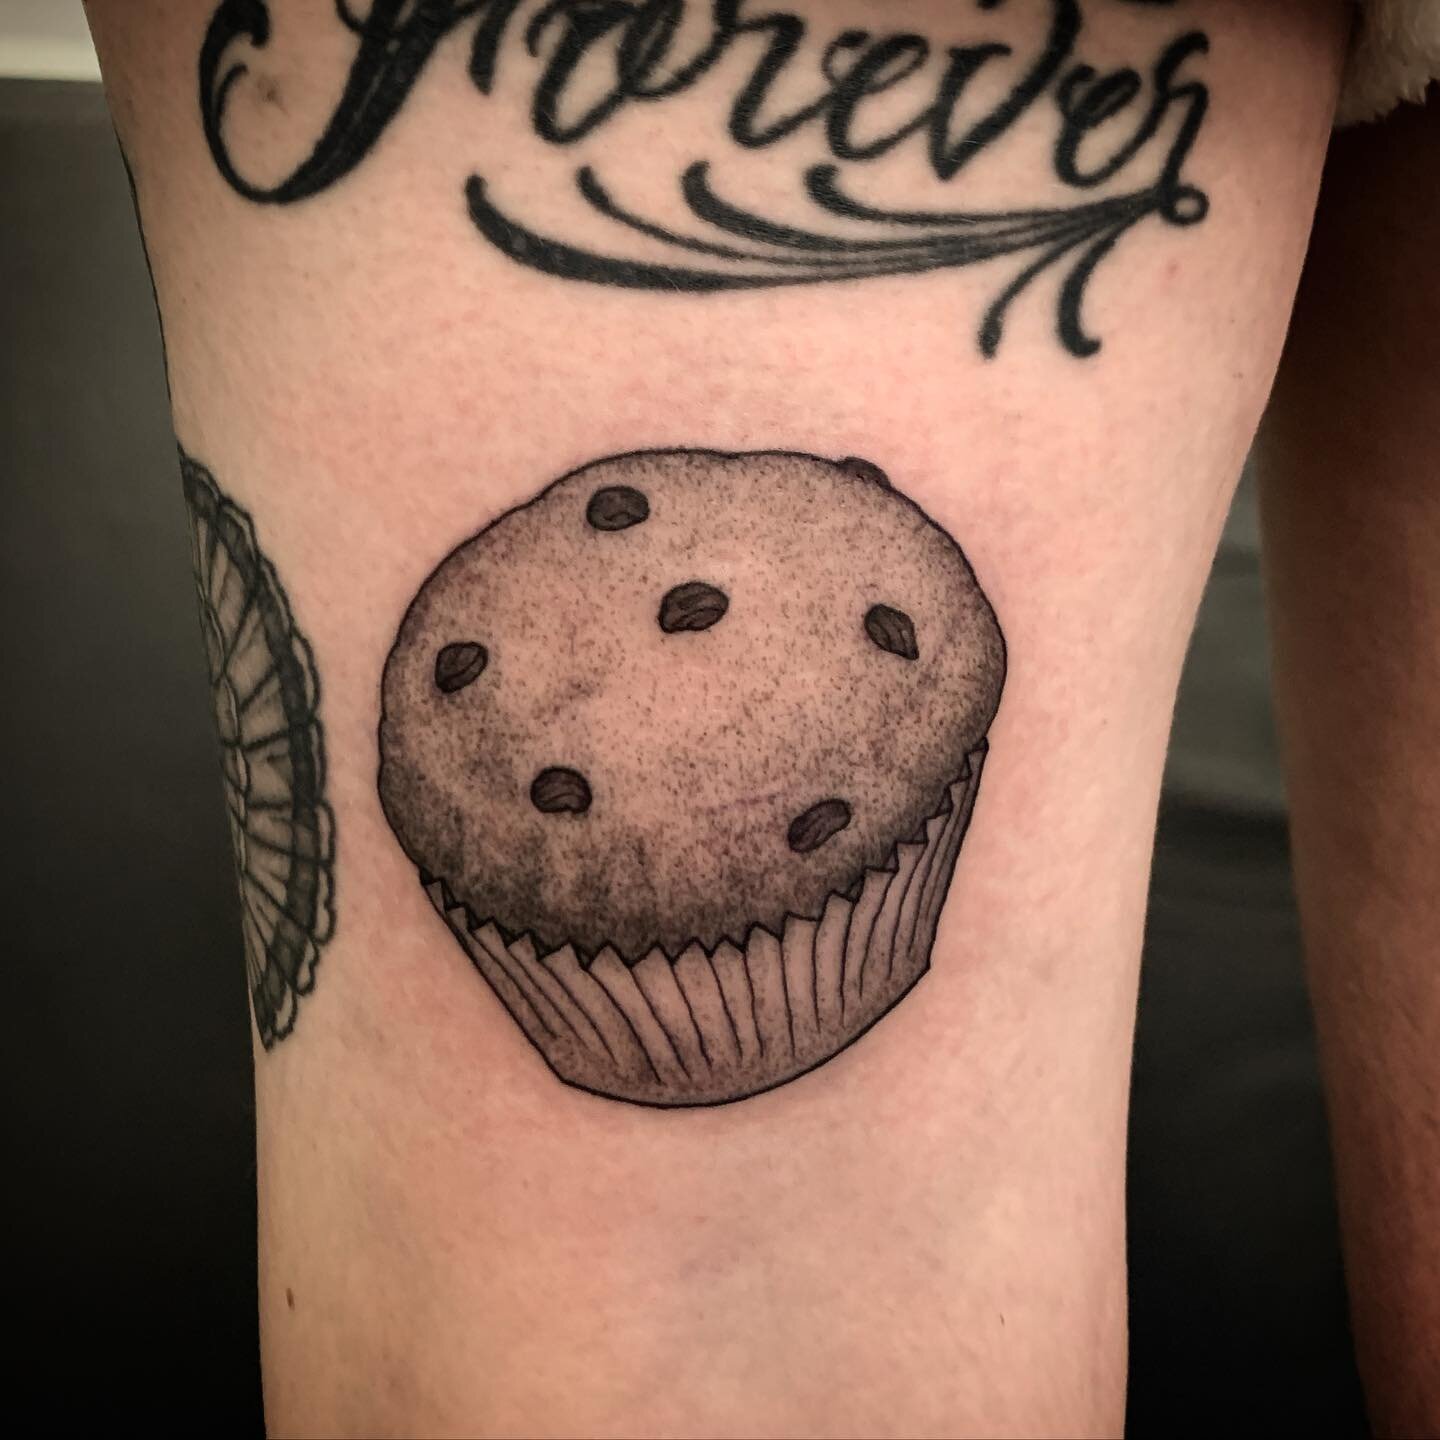 Top o the muffin to you! I&rsquo;ve never tattooed a bran muffin before; what fun!